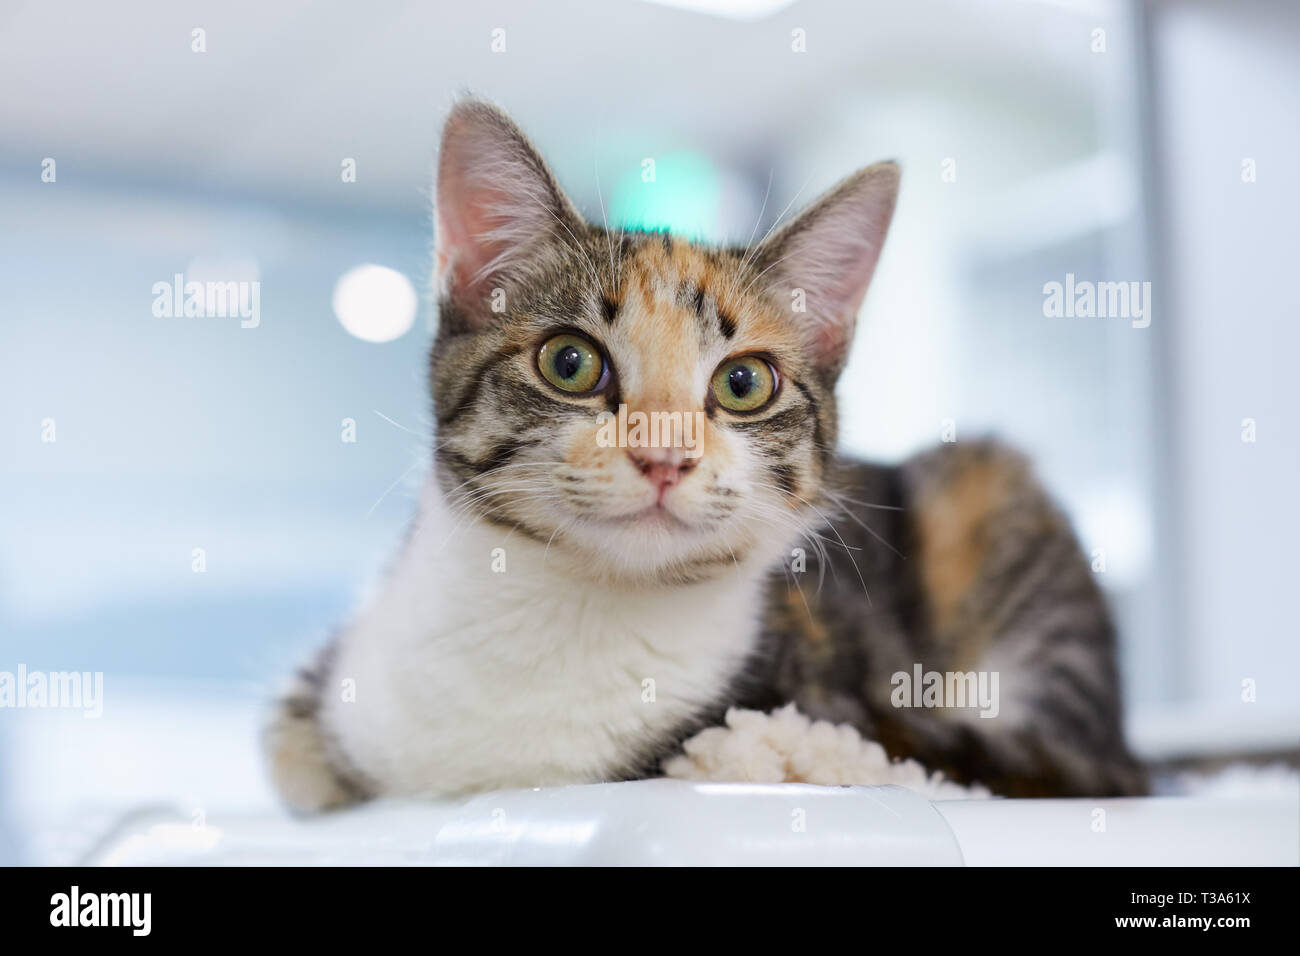 A three colored tabby cat with green eyes is relaxing on a shelf Stock Photo